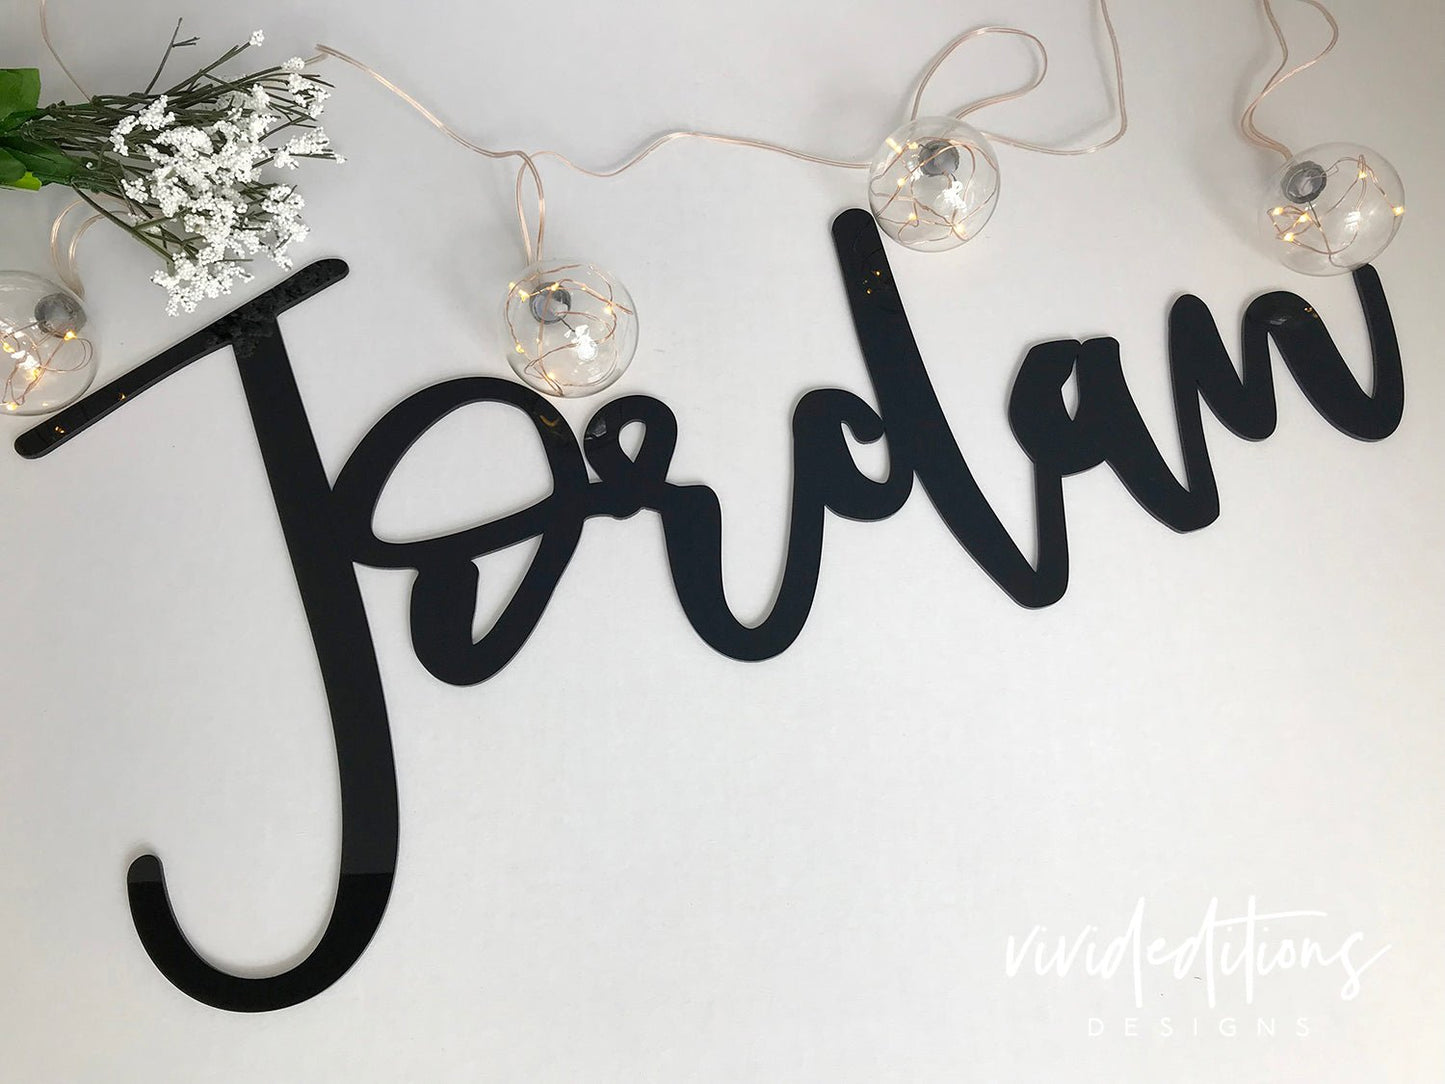 30” Silver Mirror Large Personalized Name Sign - VividEditions